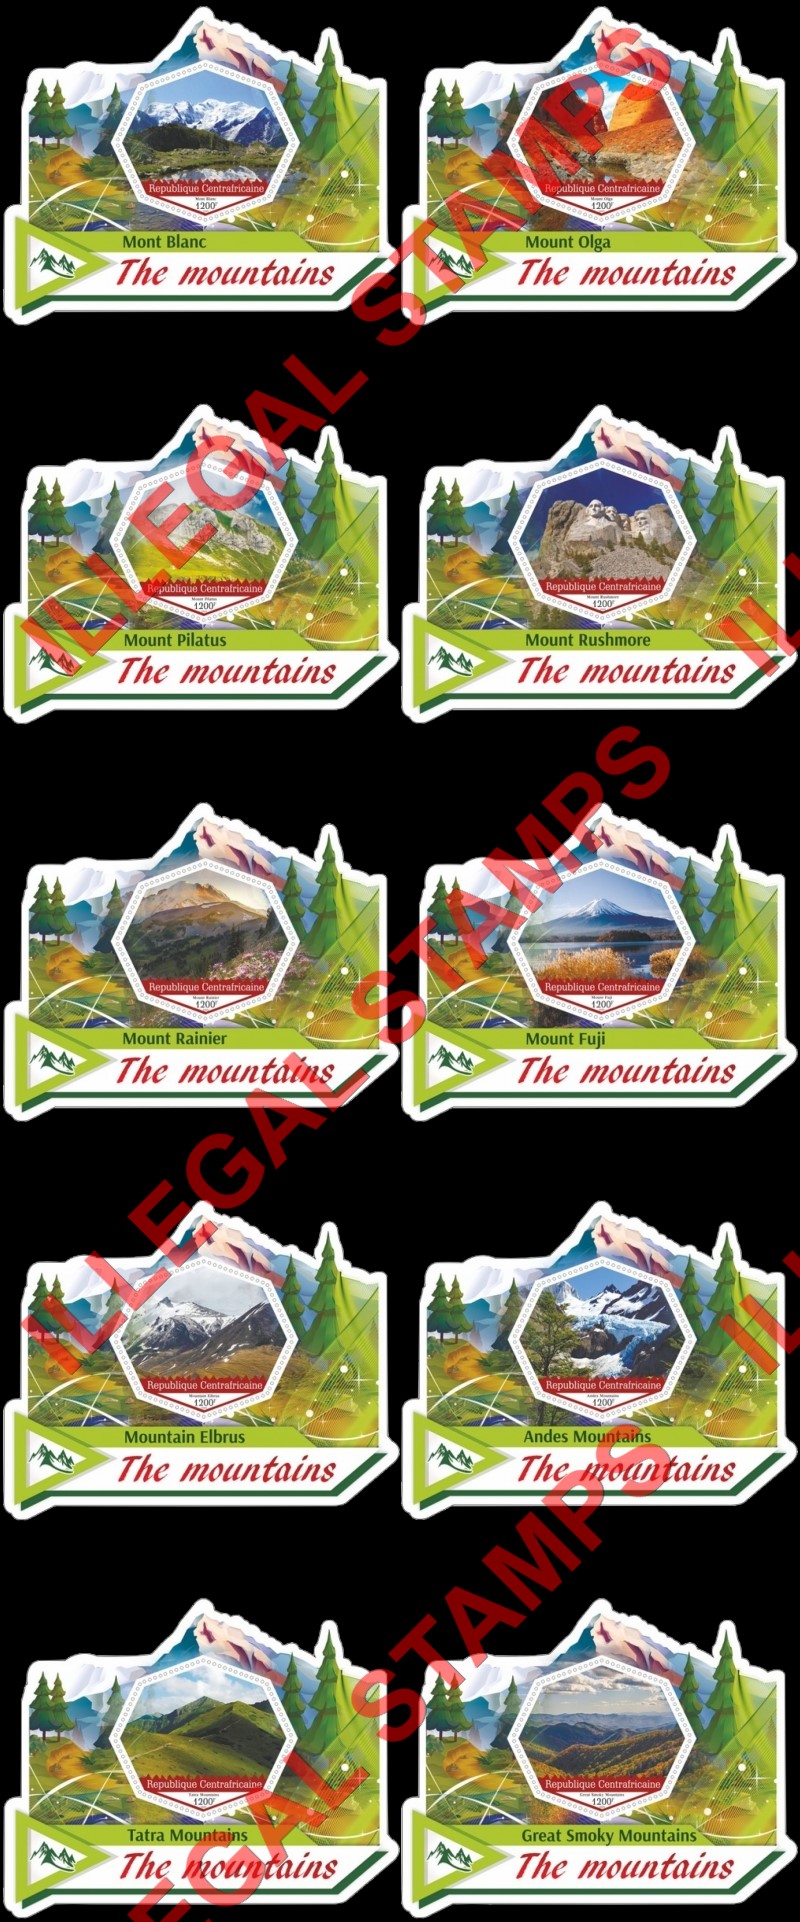 Central African Republic 2020 Mountains Illegal Stamp Souvenir Sheets of 1